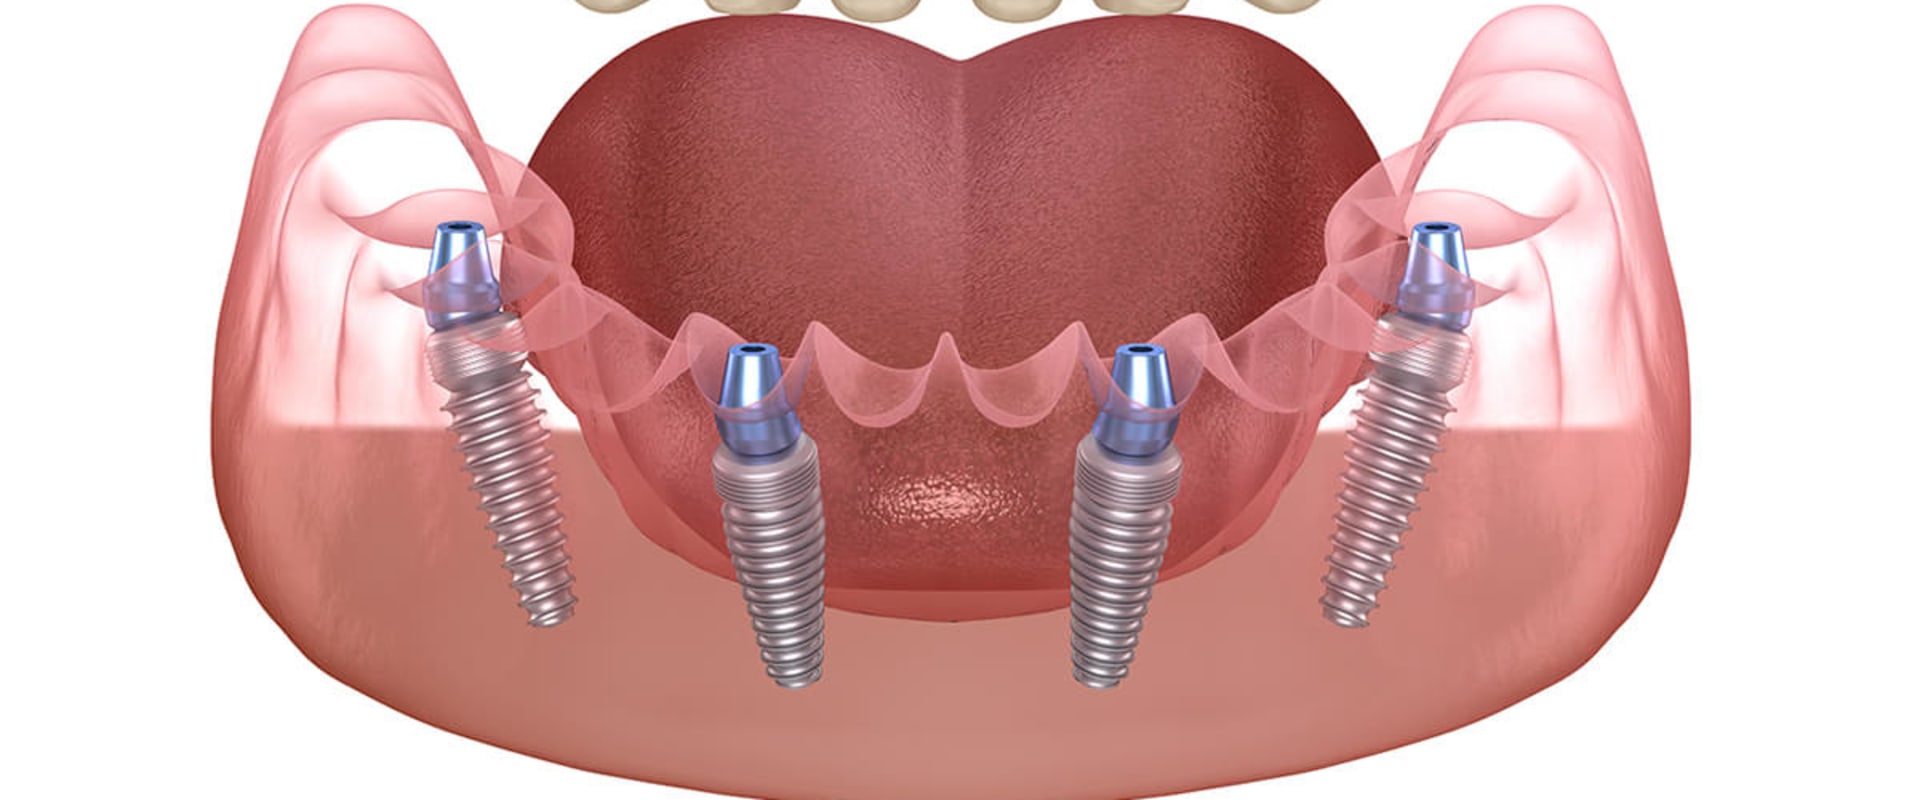 What Are the Risks of All-on-Four Dental Implants?